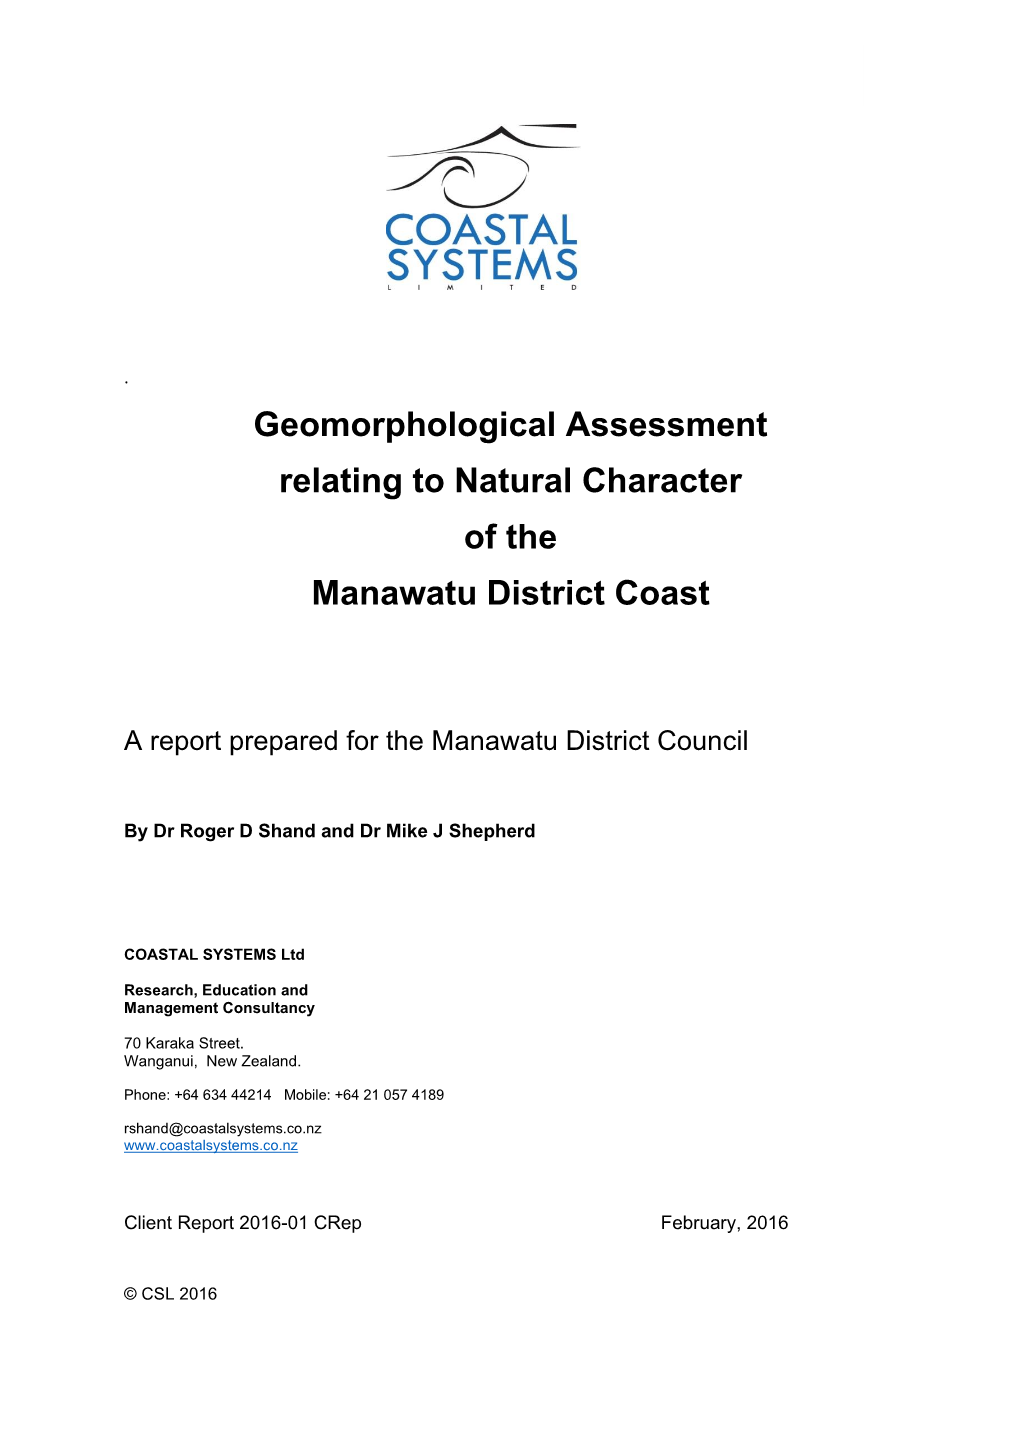 Geomorphological Assessment Relating to Natural Character of the Manawatu District Coast